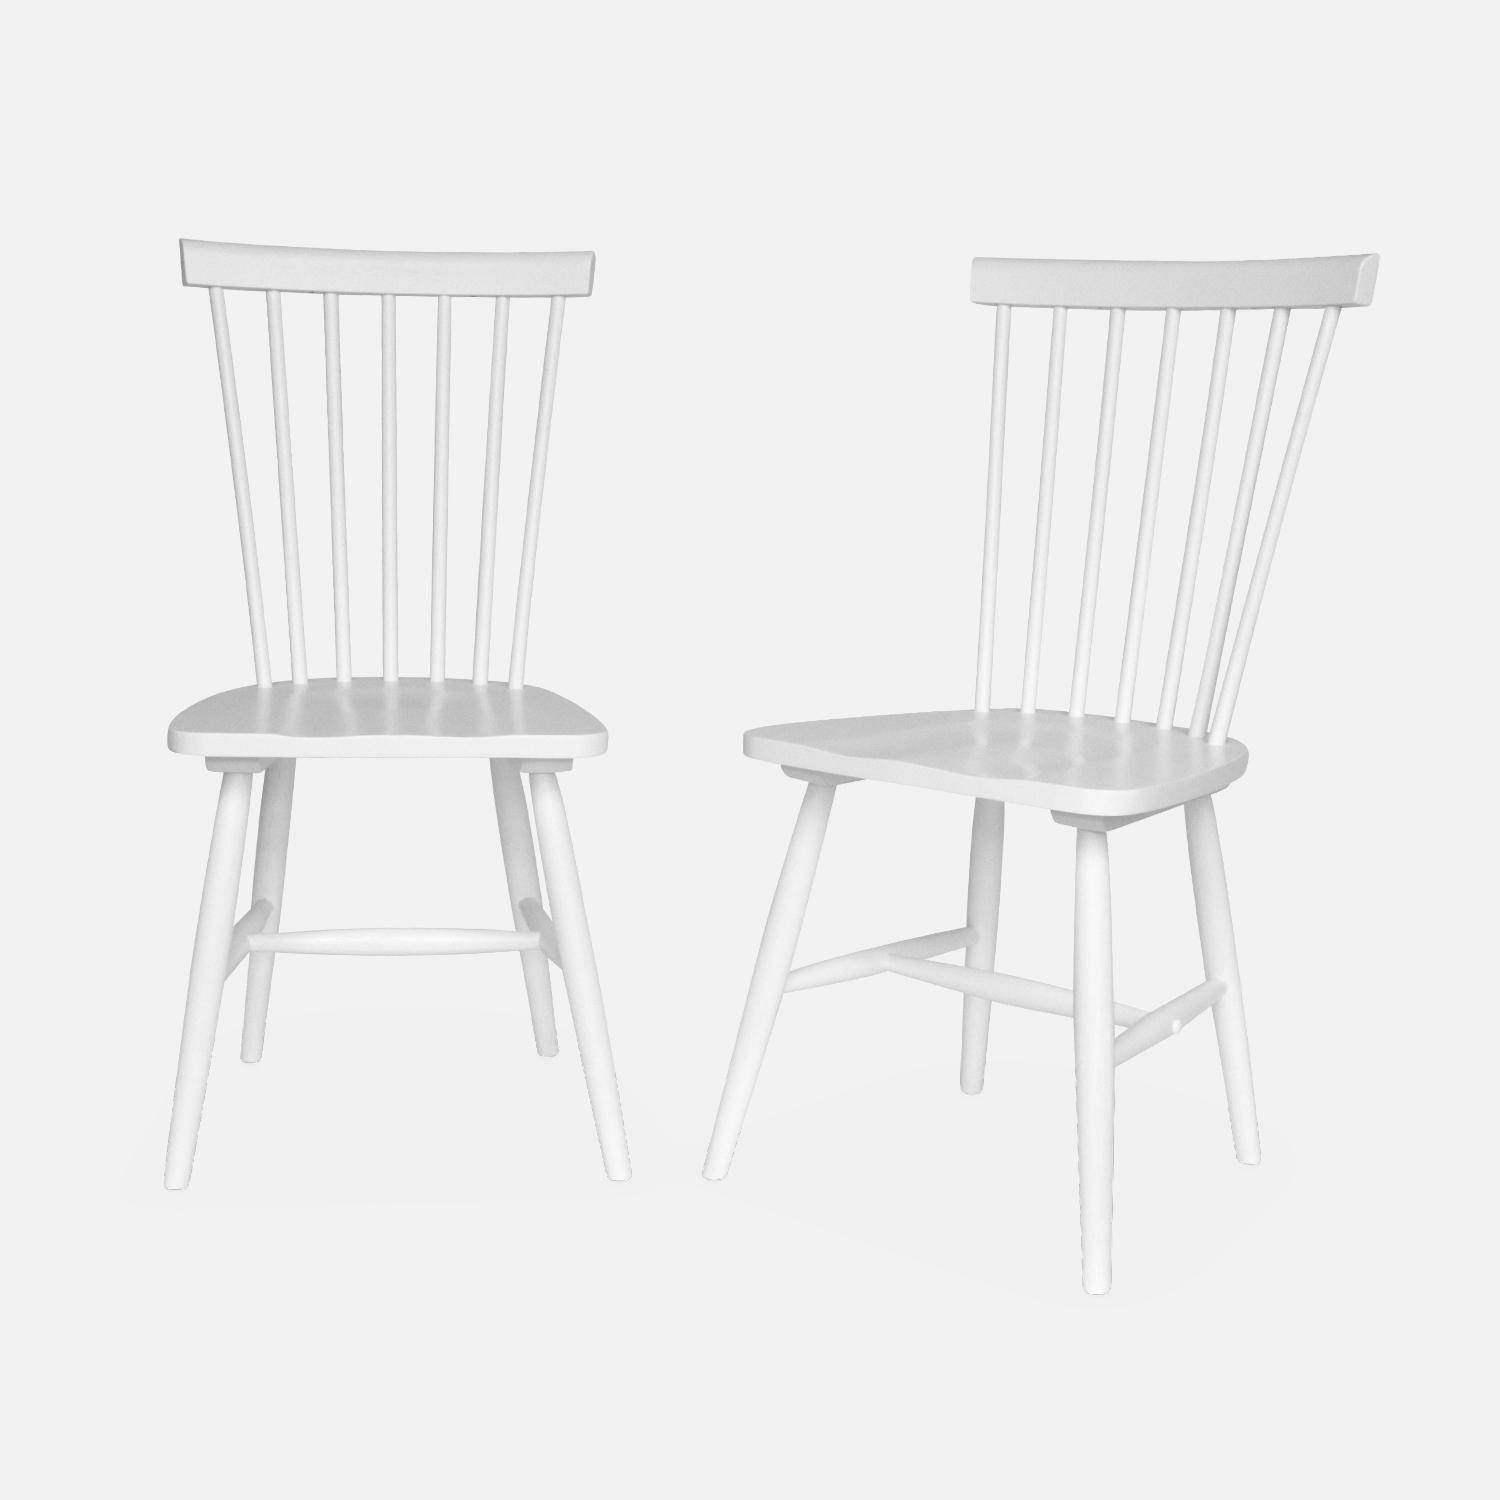 Pair of dining room chairs in Hevea wood,  L49 x W44 x H90 cm, White Photo3